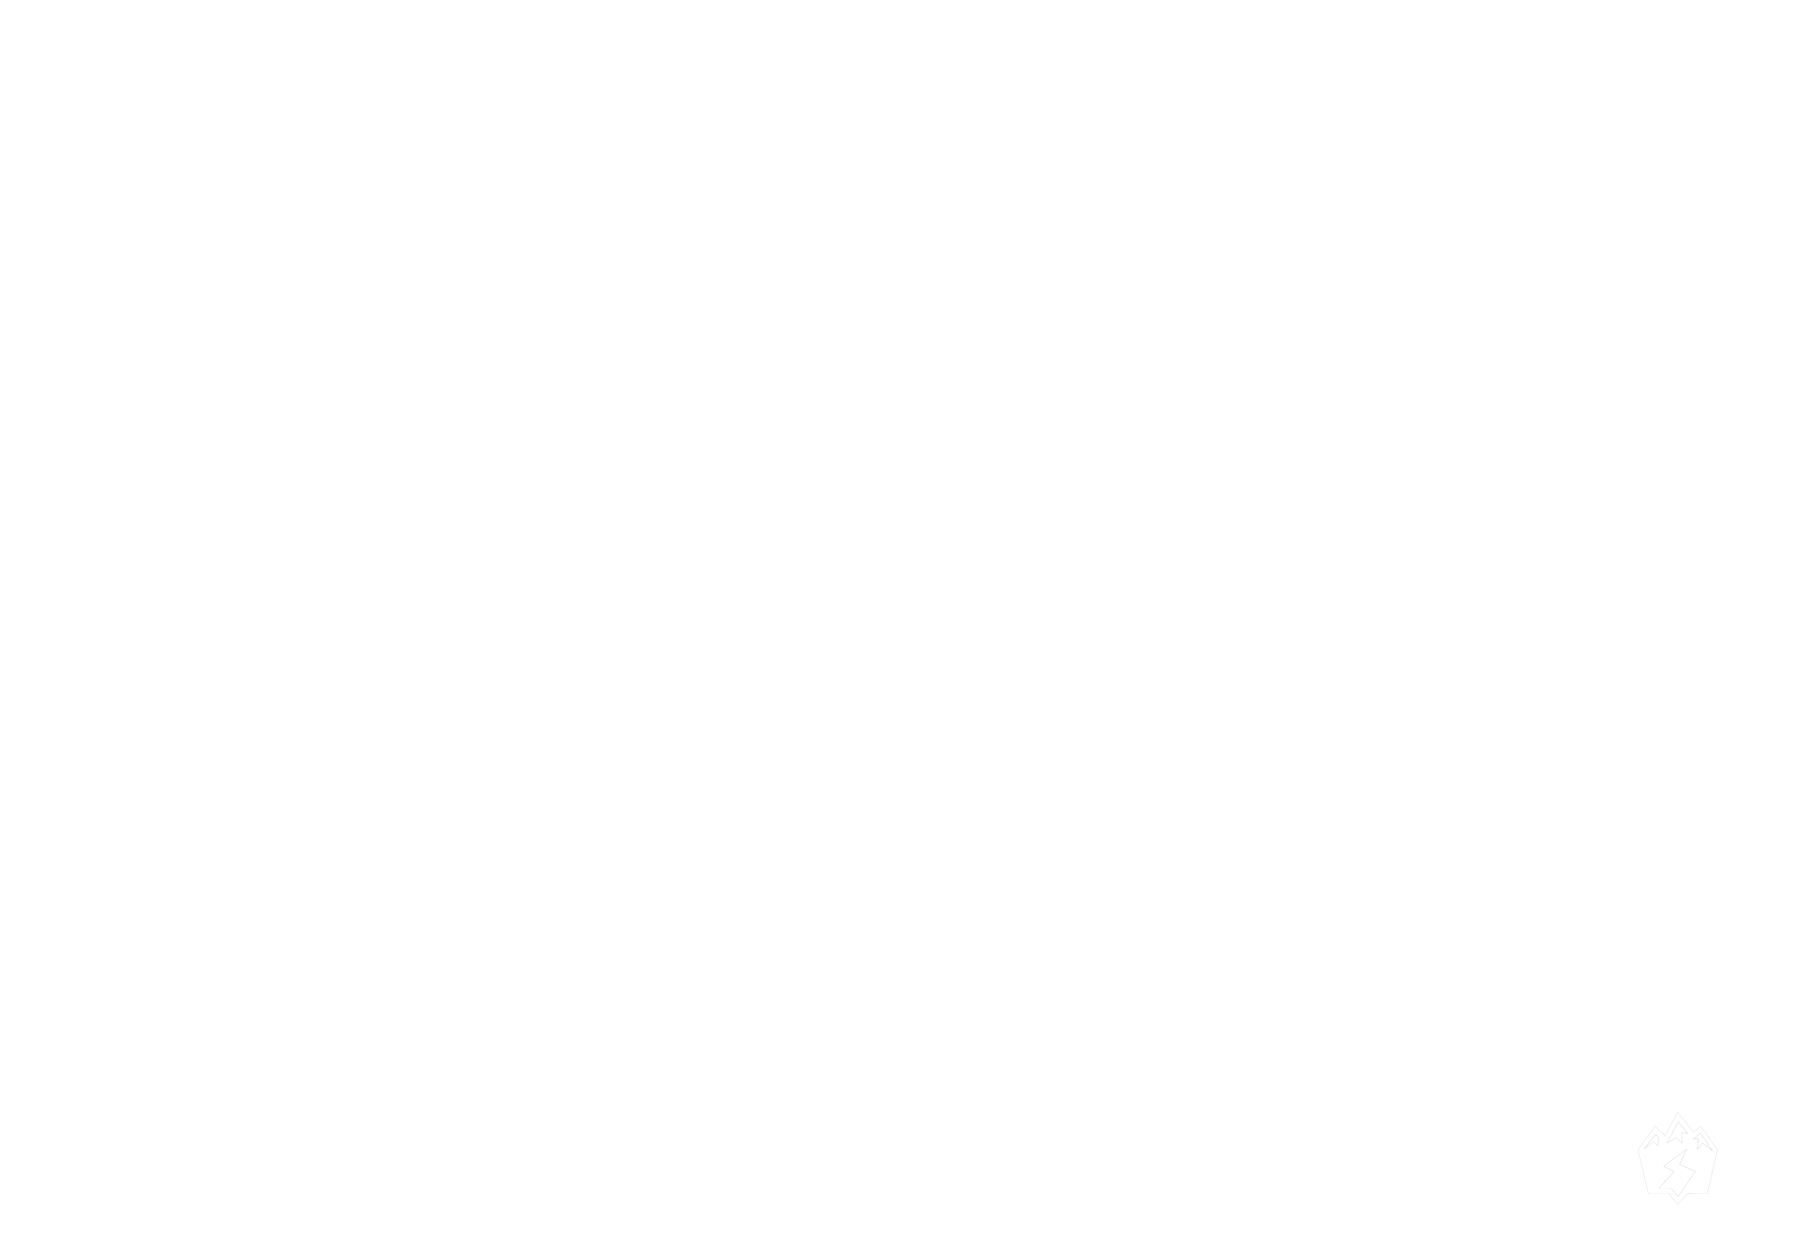 Cloud shared Security Model - An example model for IAAS Cloud System